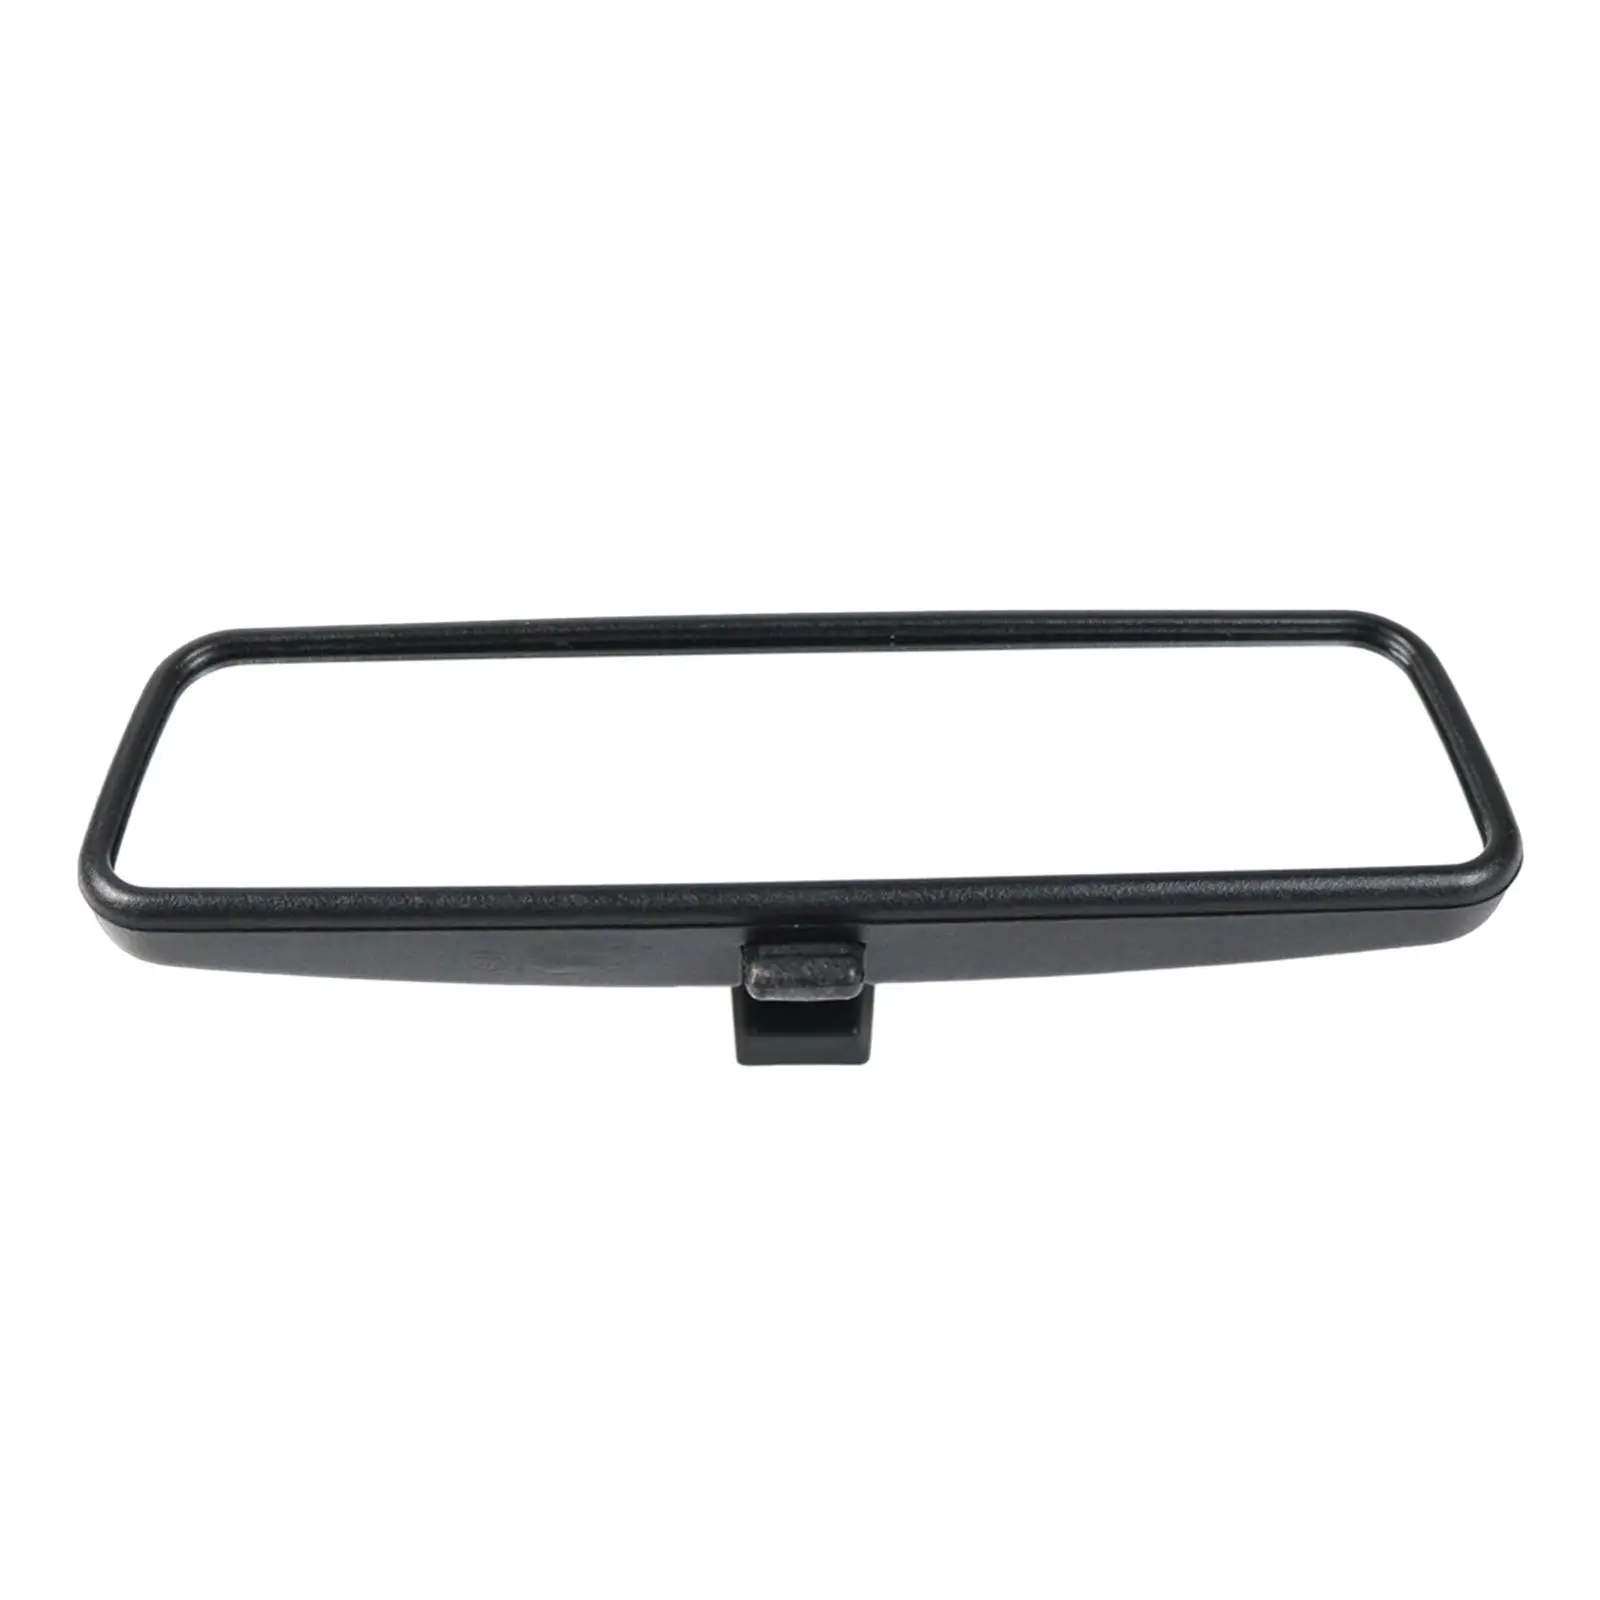 Interior Rear View Mirror 814842 for Renault Easy to Install Accessory